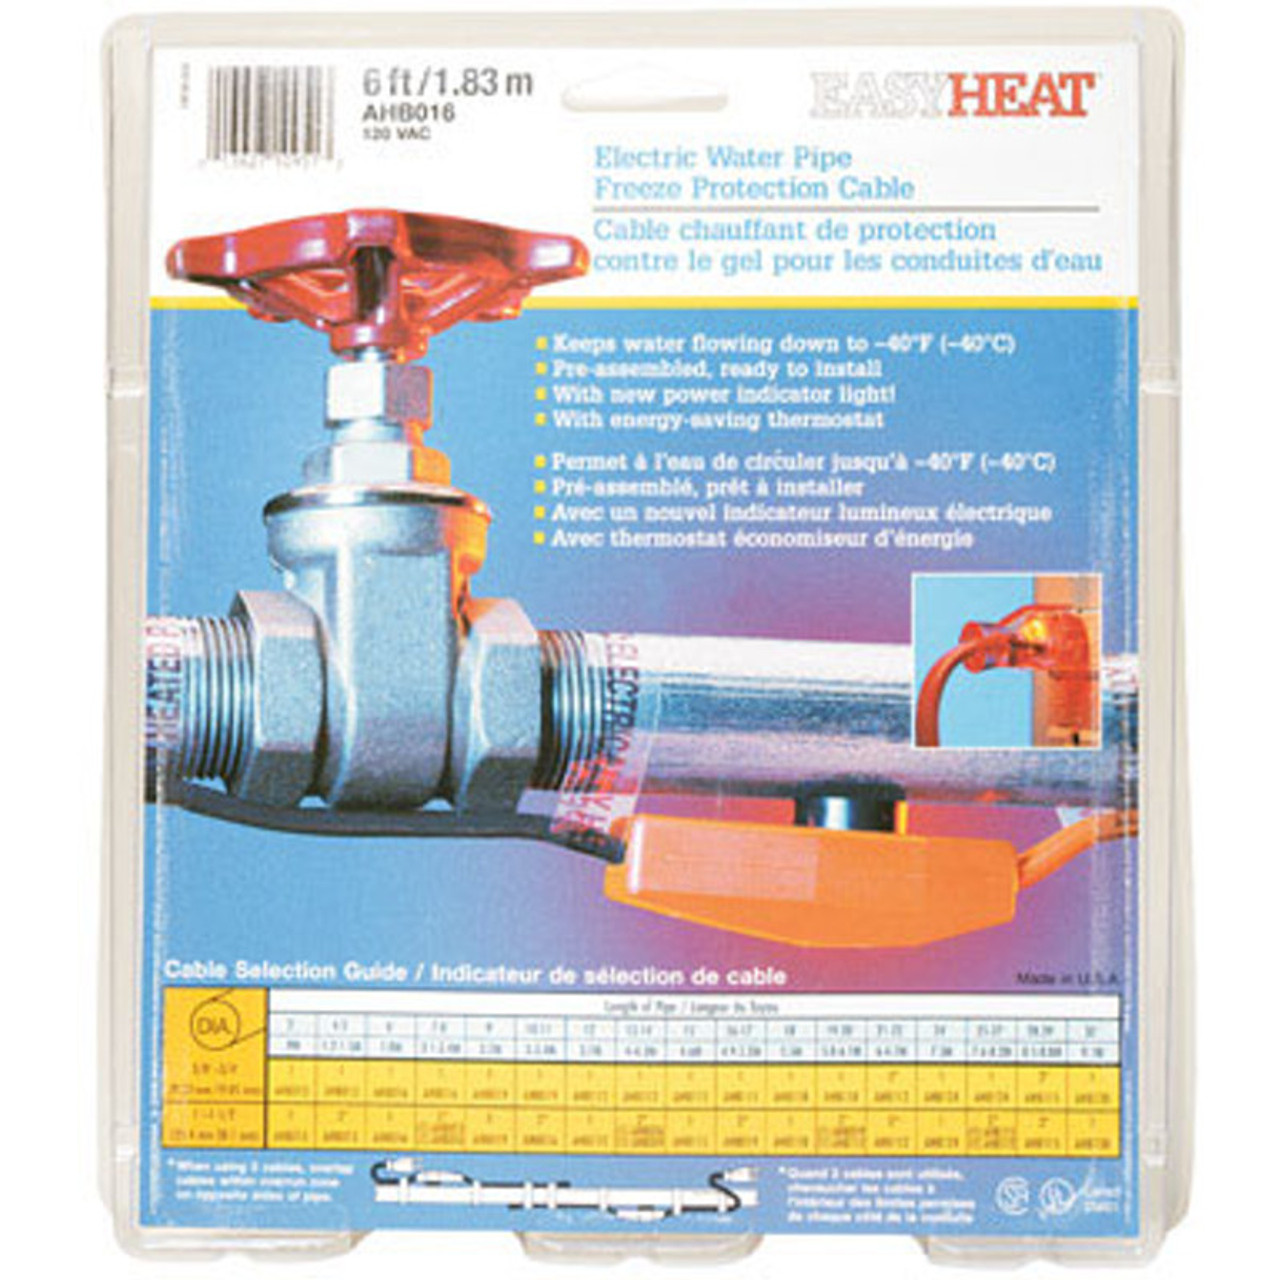 Easy Heat Pipe Heating Cable 30 ft. AHB-130